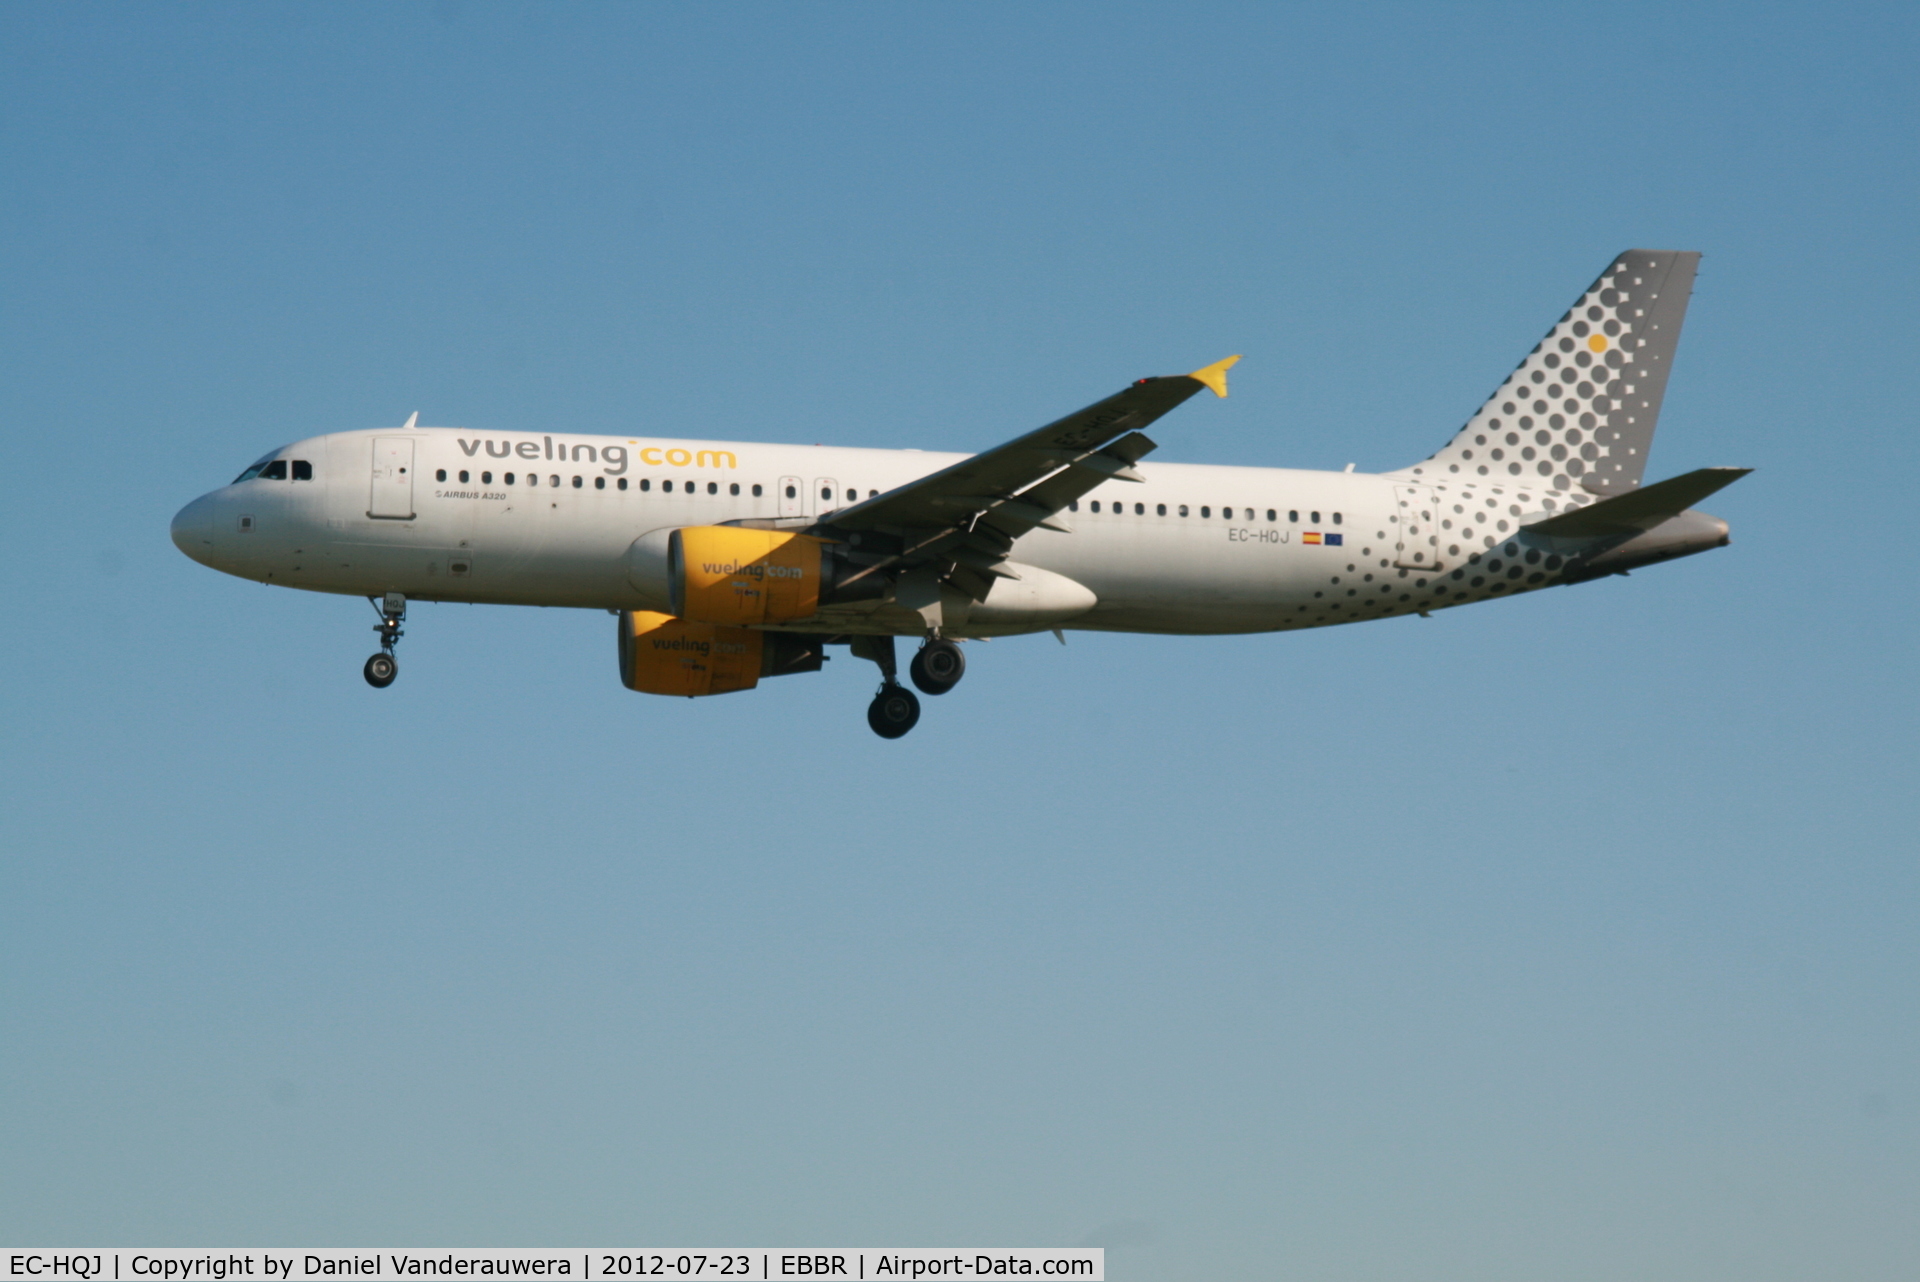 EC-HQJ, 2001 Airbus A320-214 C/N 1430, Arrival of flight VY8988 to RWY 25L